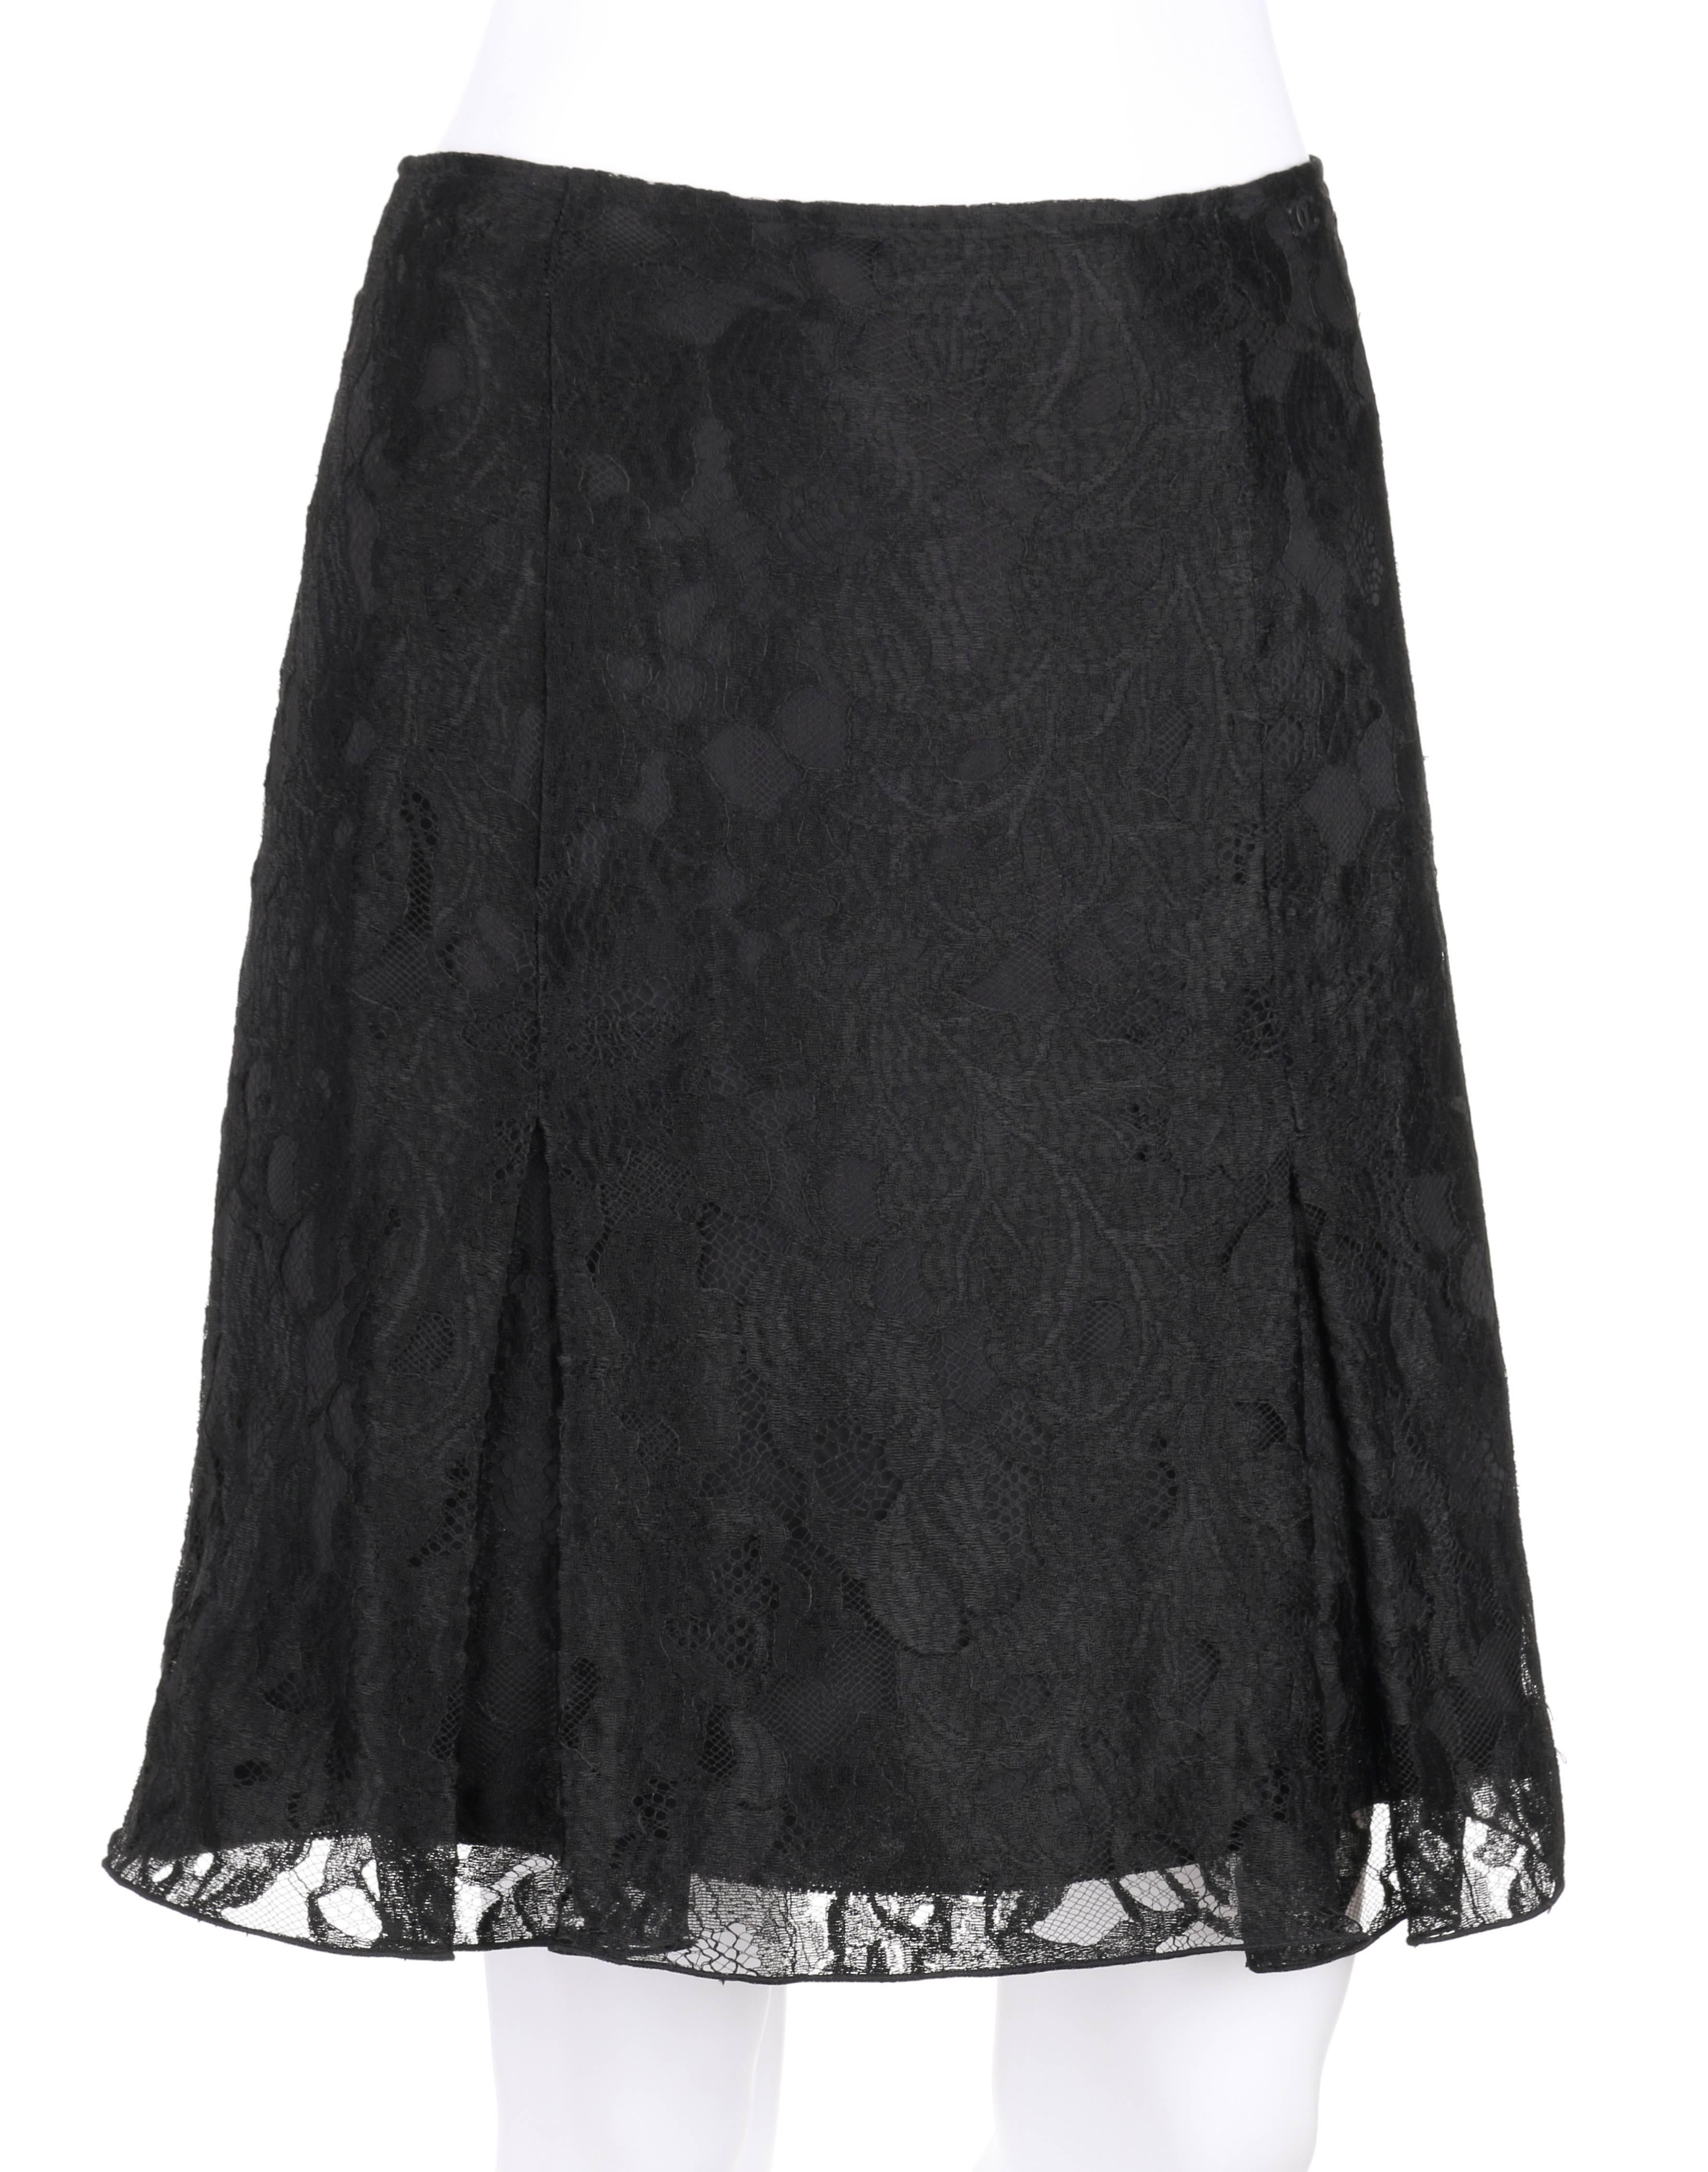 Chanel A/W 2006 black floral lace overlay box pleated skirt. Black 